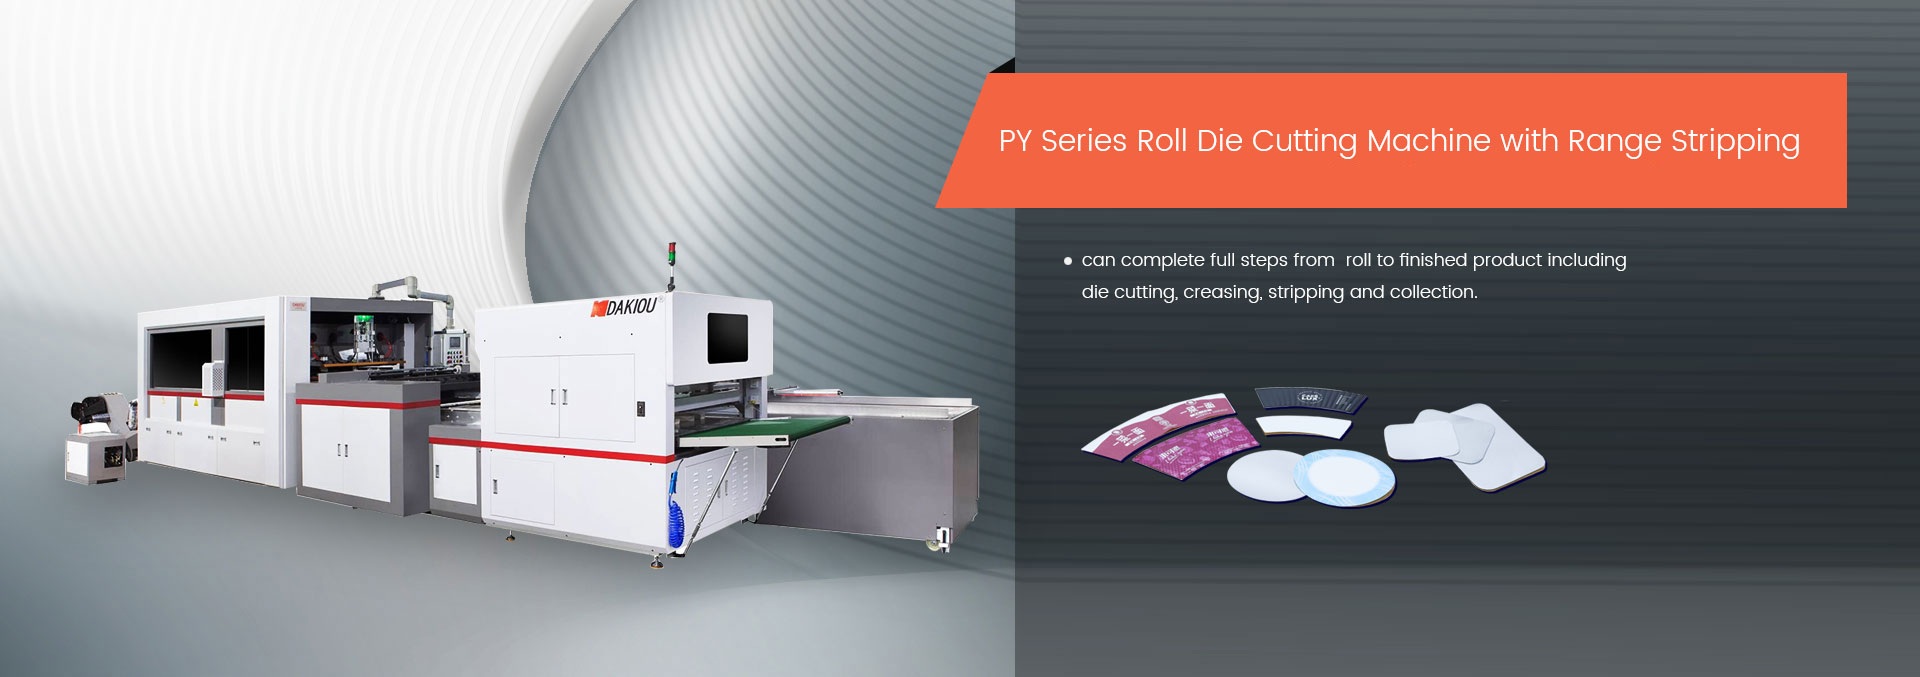 PY Automatic Full-stripping Roll Die Cutting Machine;can complete full steps from roll to finished product including die cutting,creasing.stripping and collection